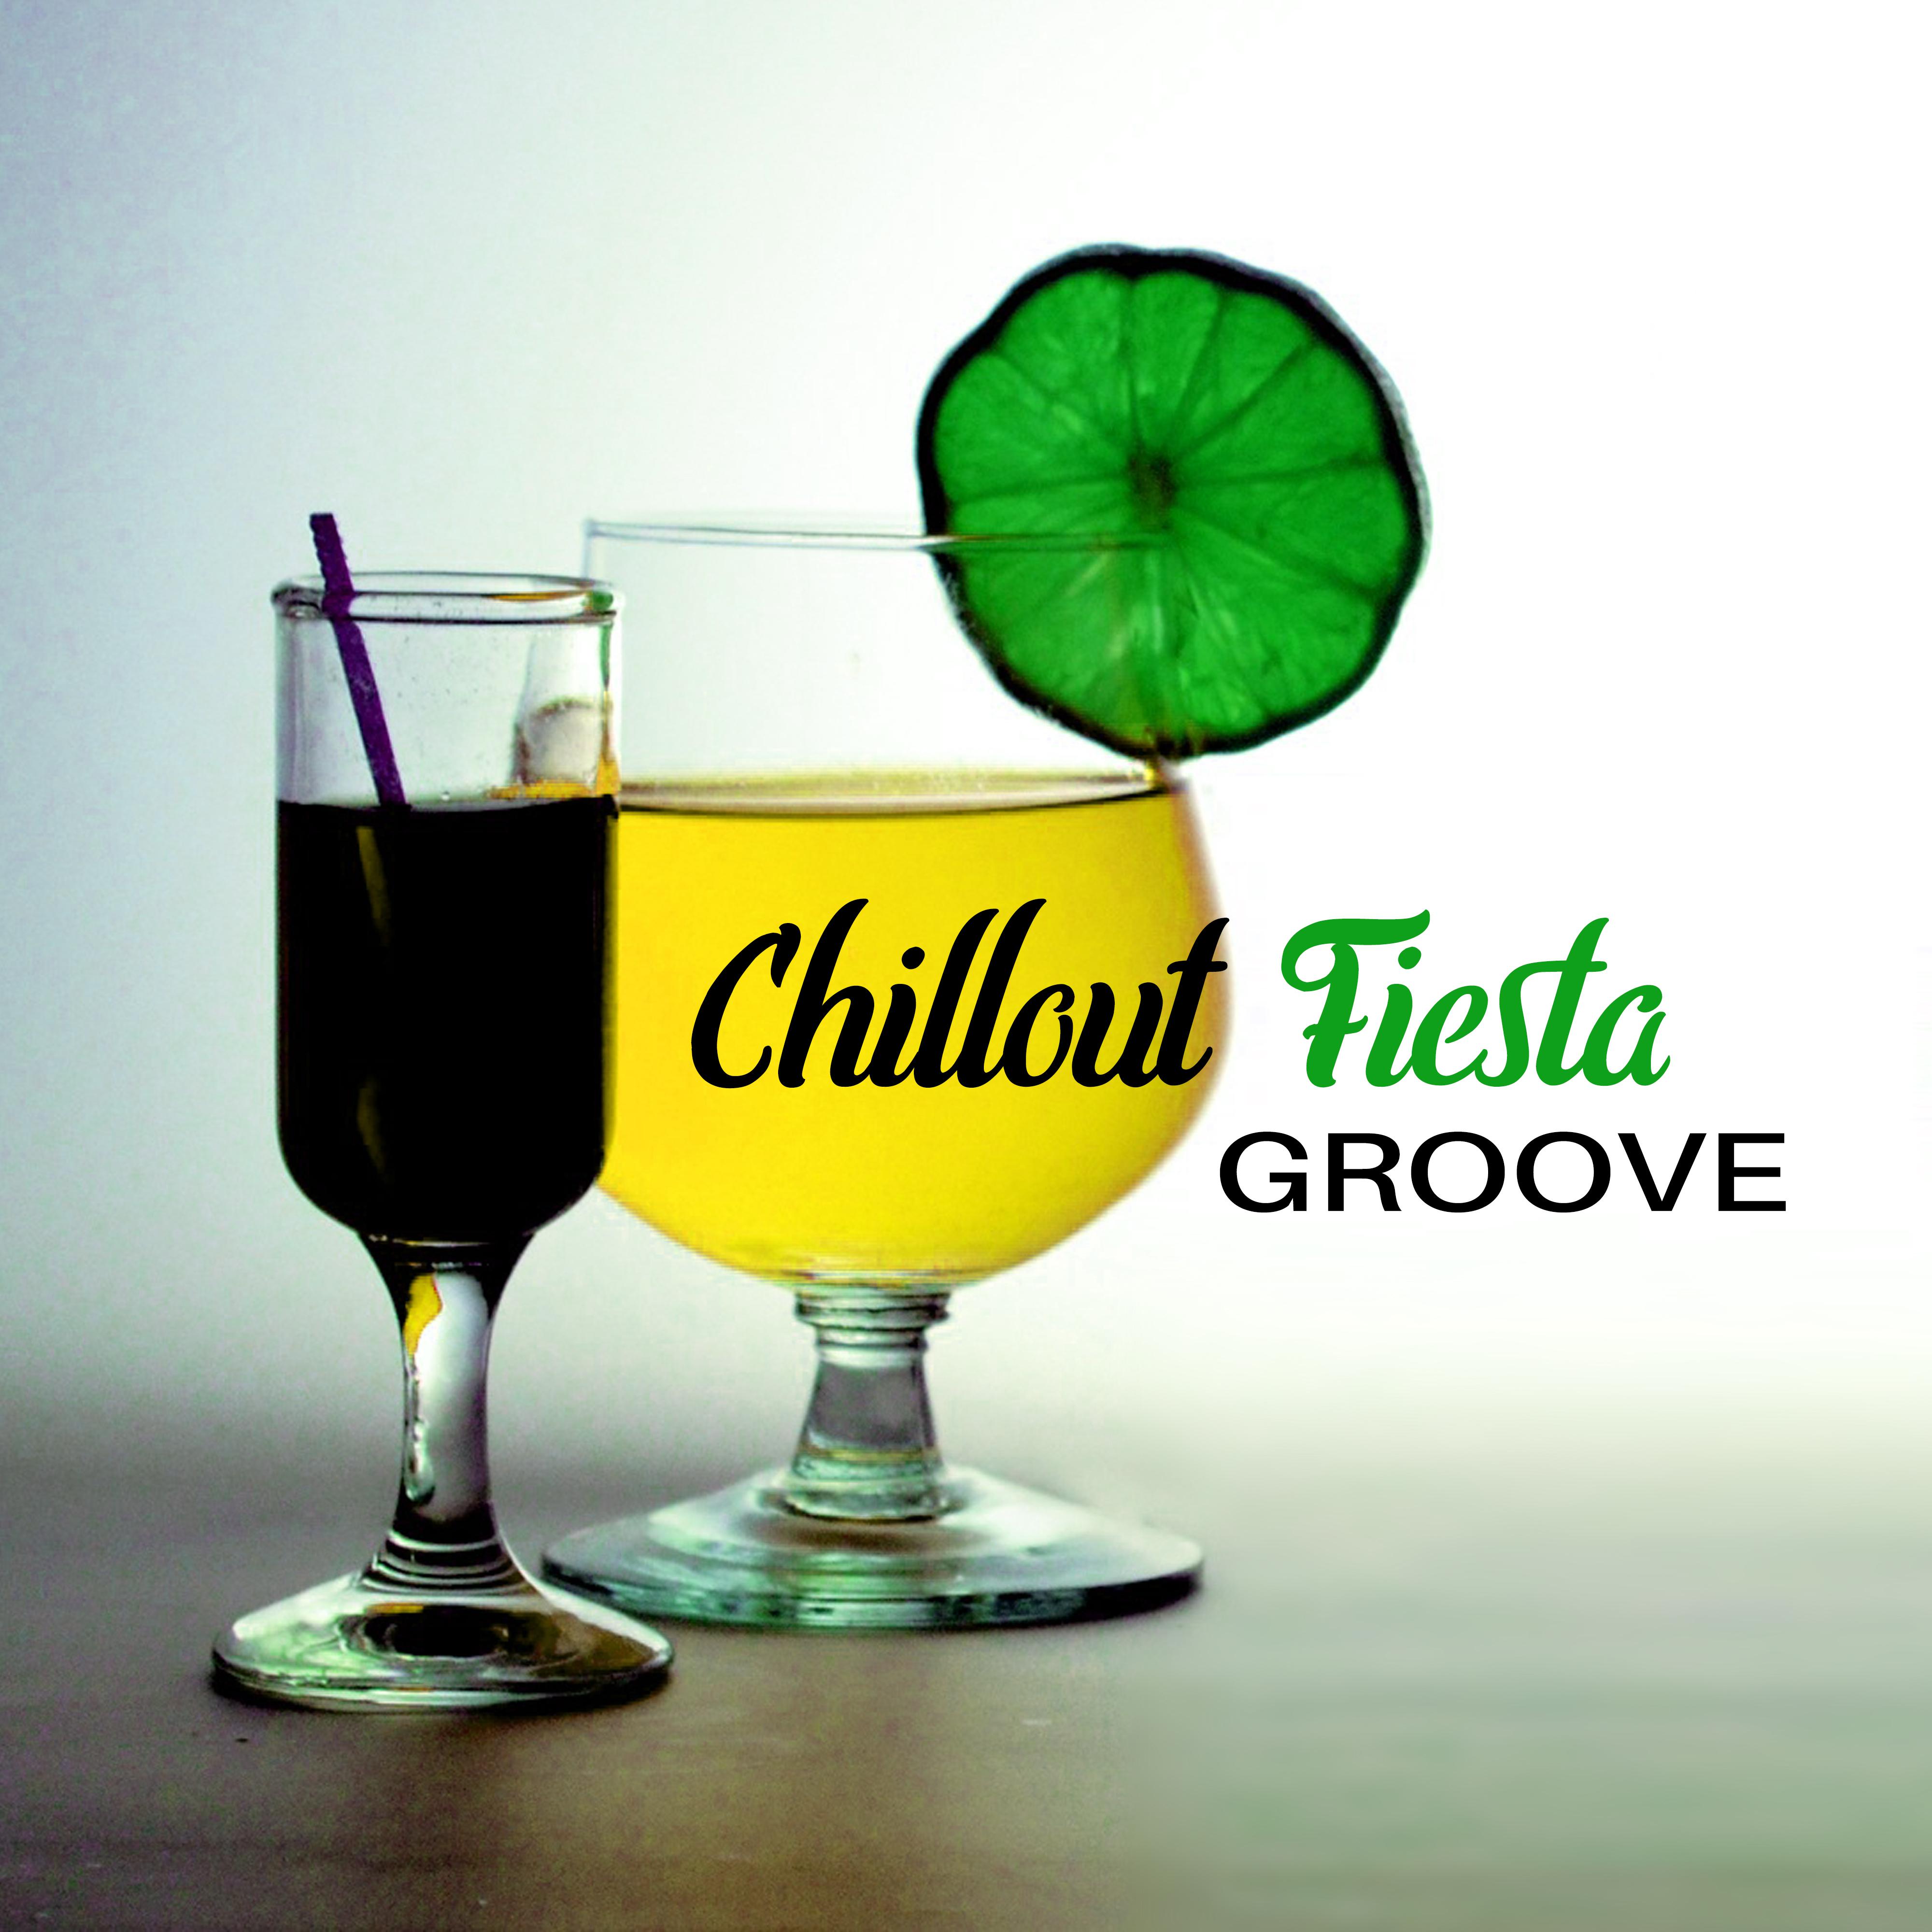 Chillout Fiesta Groove  Sexy Chill Out Music Channel, Bealeares Island, Verano